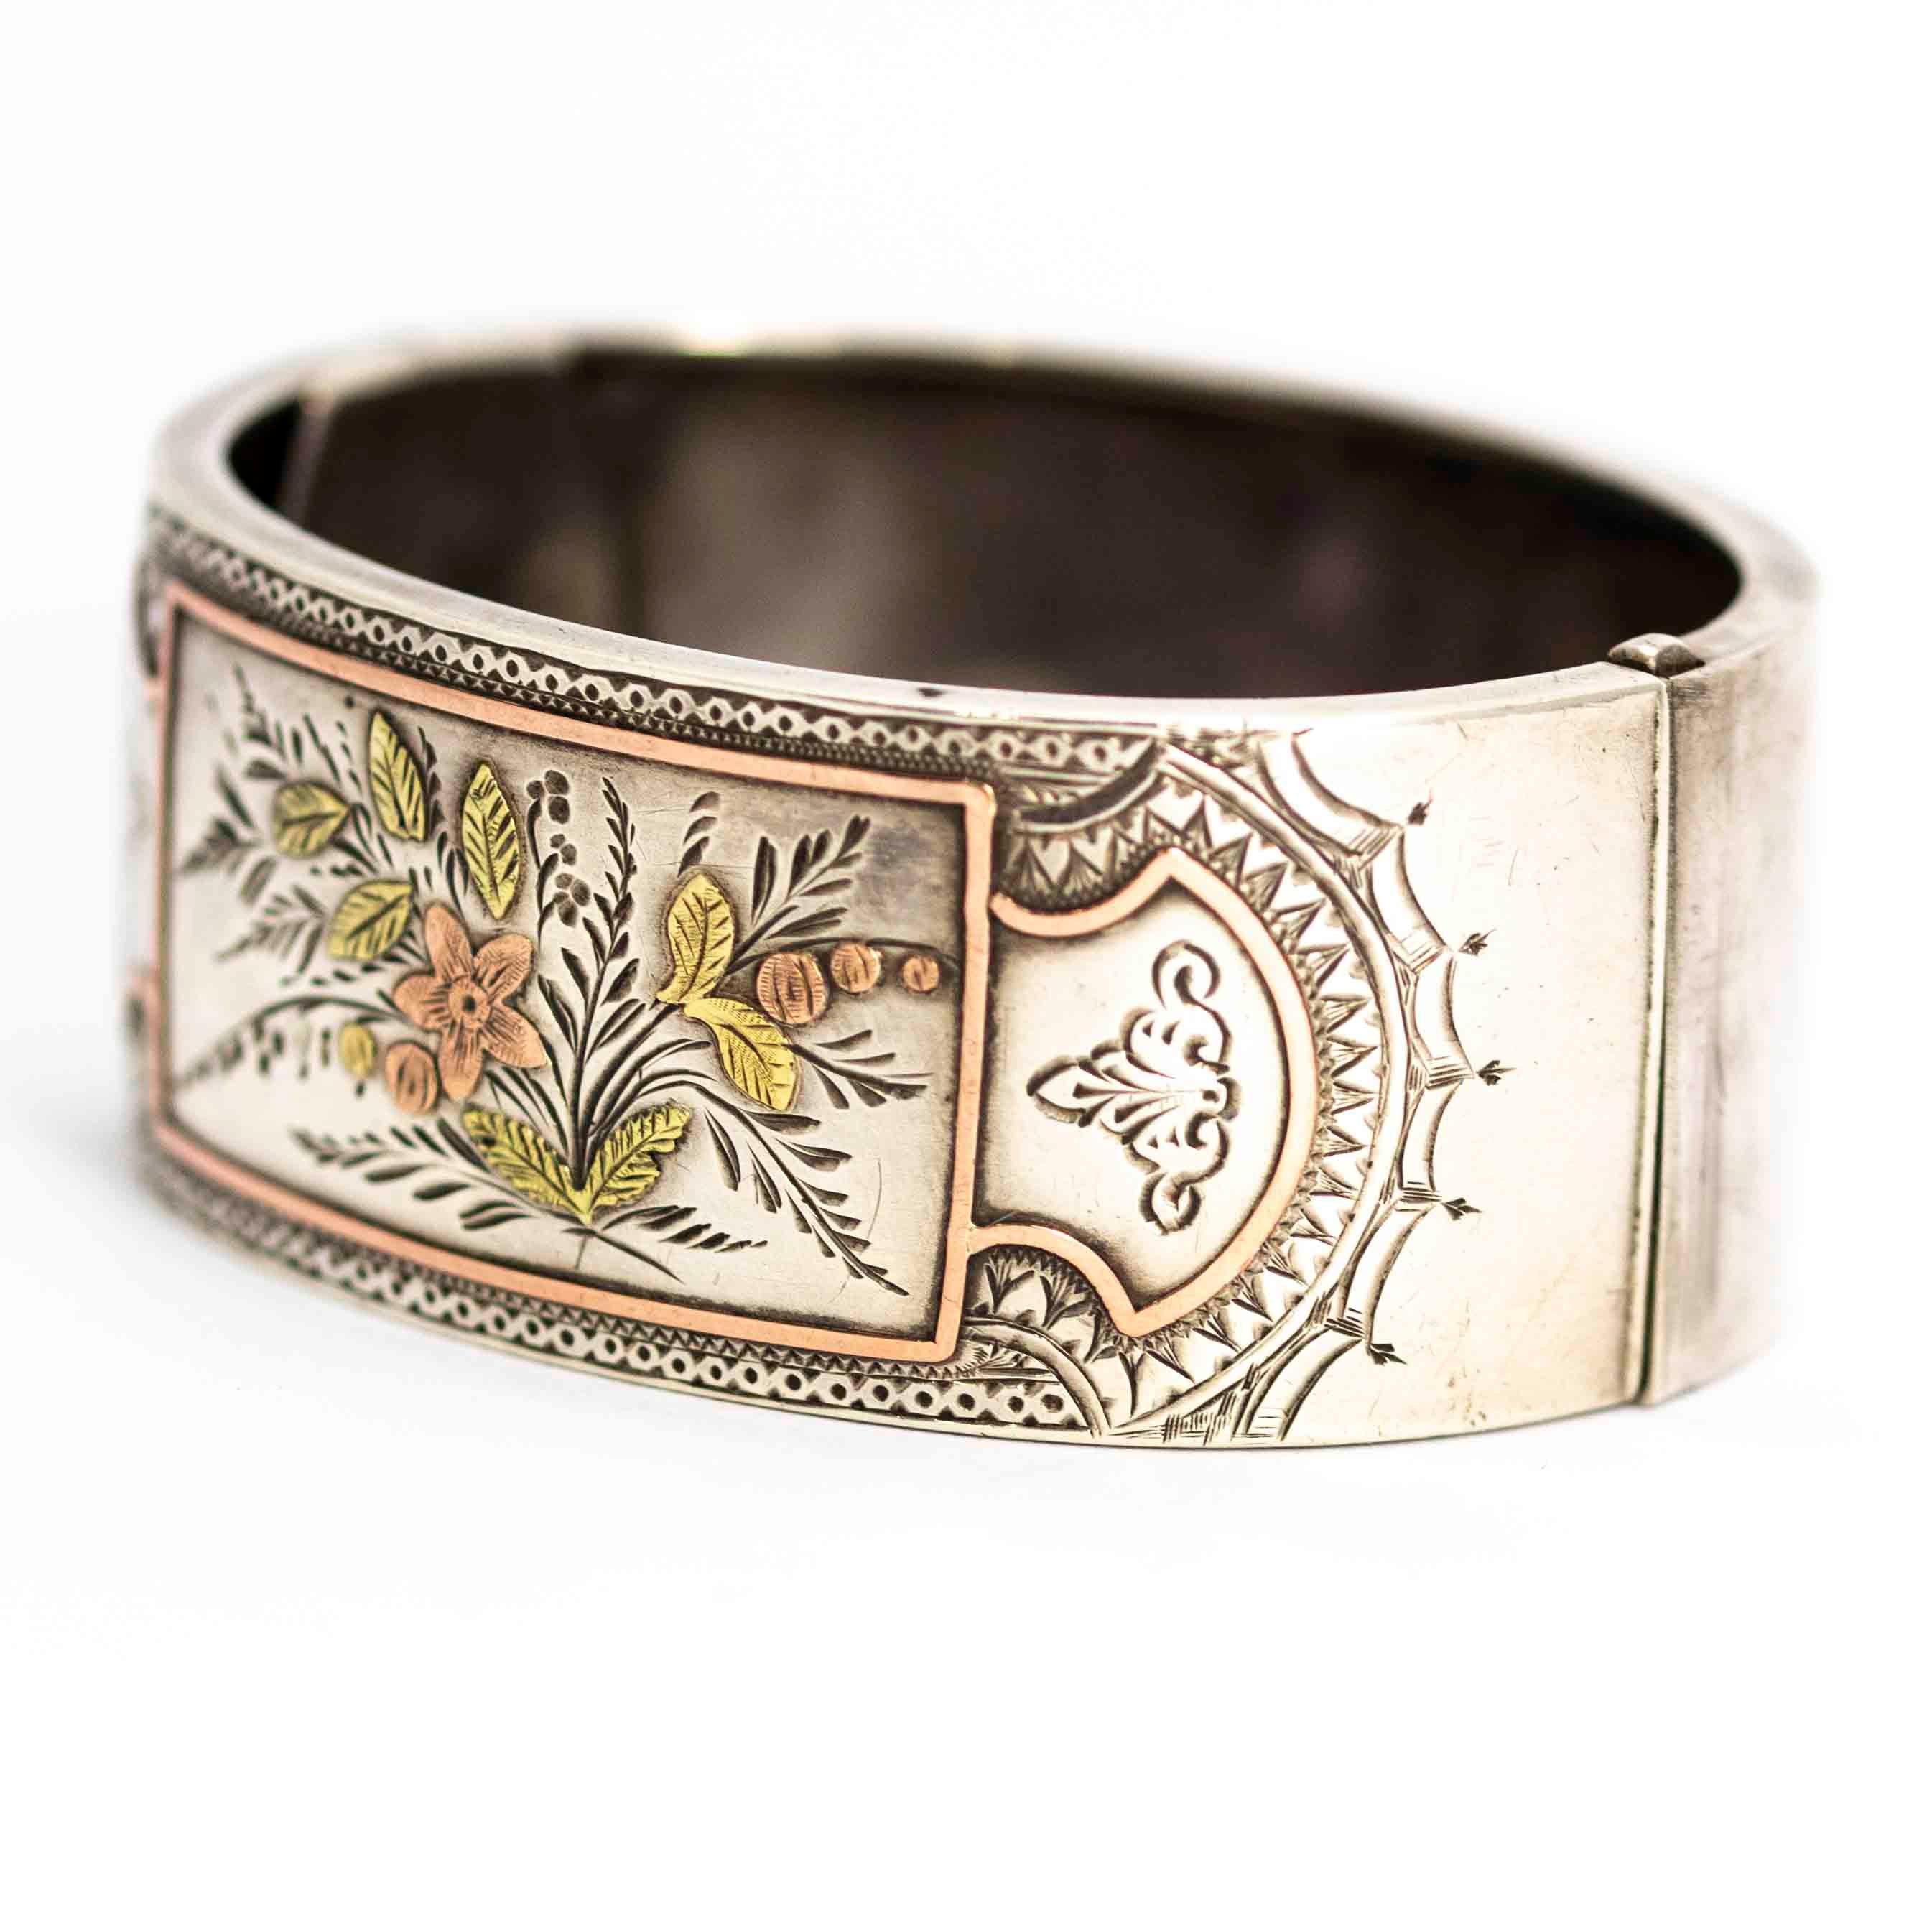 An exquisite antique bangle from the aesthetic movement in the Victorian era circa 1870. Decorated with superb hand-chased detailing with rose gold and yellow gold overlay leaf and flower motifs. Modelled in silver.

Width: 6.3cm (from hinge to